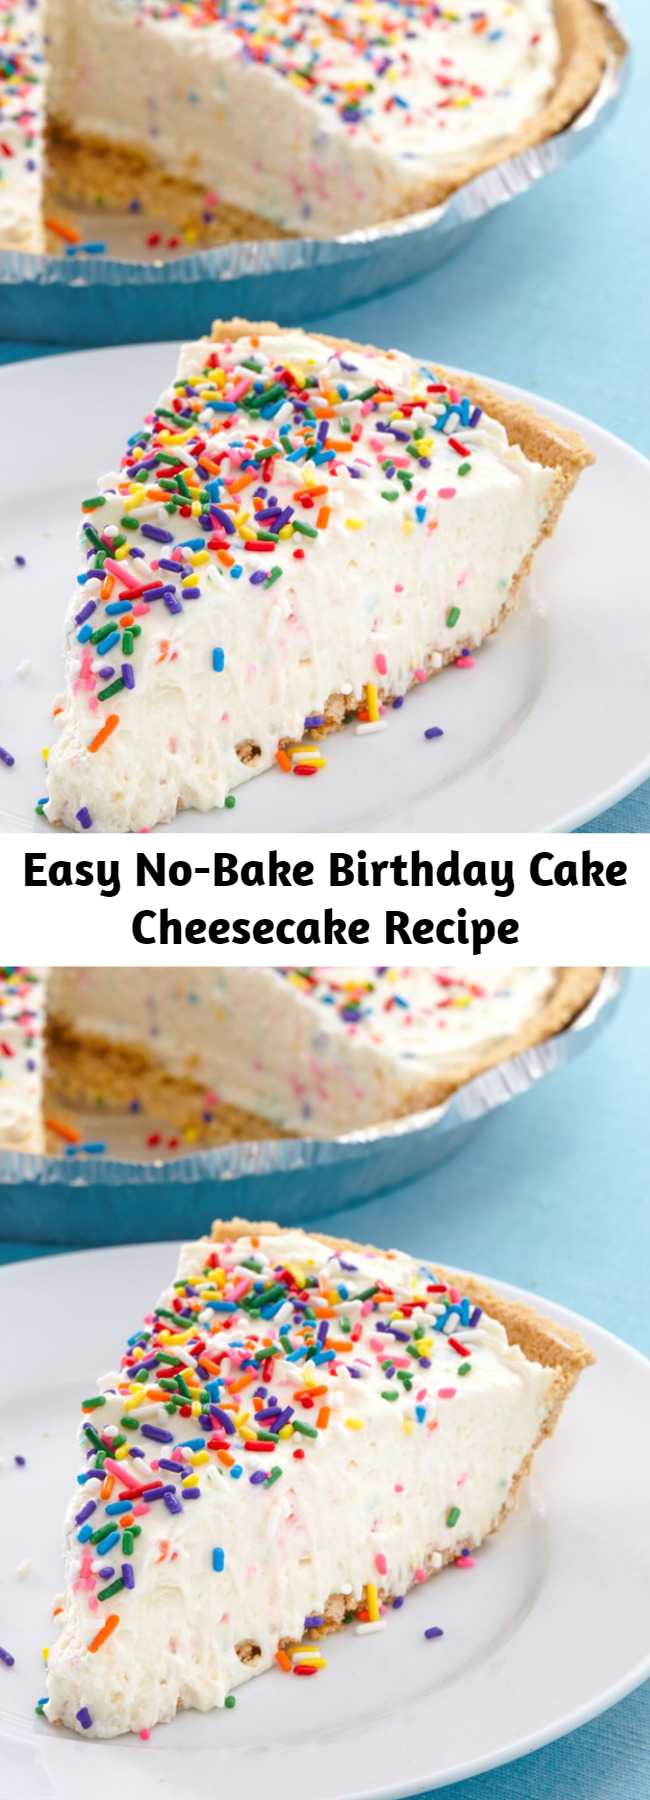 Easy No-Bake Birthday Cake Cheesecake Recipe - The rainbow of colors and flavors you love in birthday cake mix—plus lots of sprinkles. You'll fall in love with these no-bake birthday cake cheesecake. #easy #recipe #nobake #nobakerecipes #birthdaycake #birthdayrecipes #cheesecake #dessert #dessertrecipes #funfetti